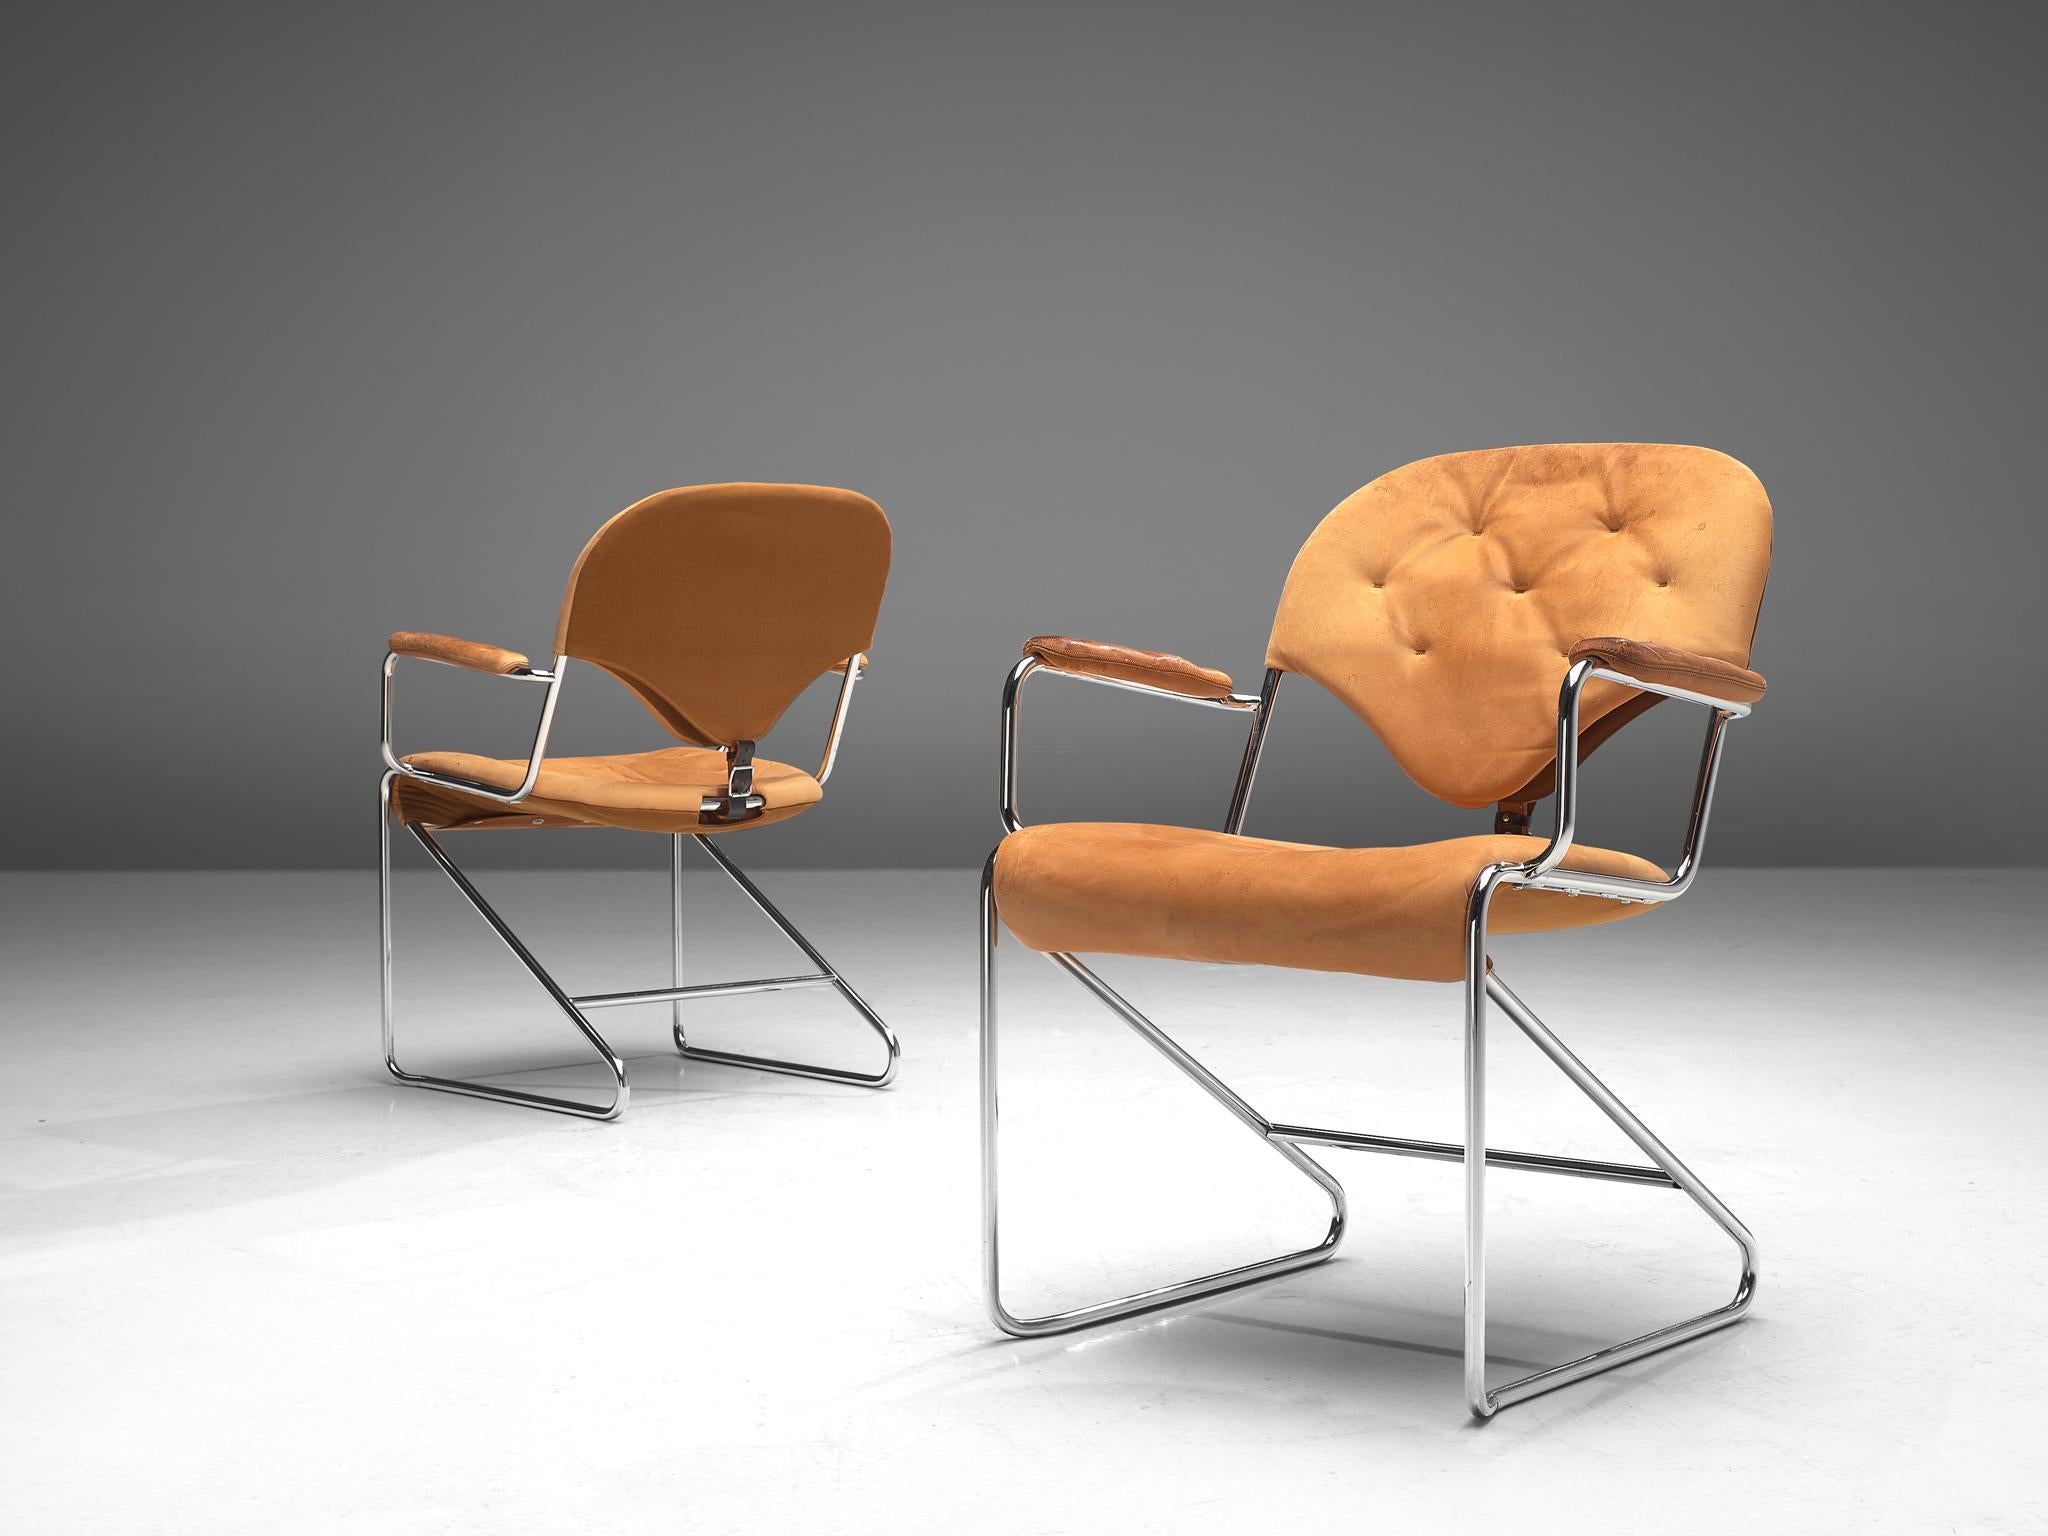 Sam Larsson for DUX International, armchairs model '1974', leather, fabric, metal, Sweden, designed in 1974

Pair of armchairs designed by Sam Larsson and manufactured by DUX International. These chairs have a chrome-plated tubular steel frame and